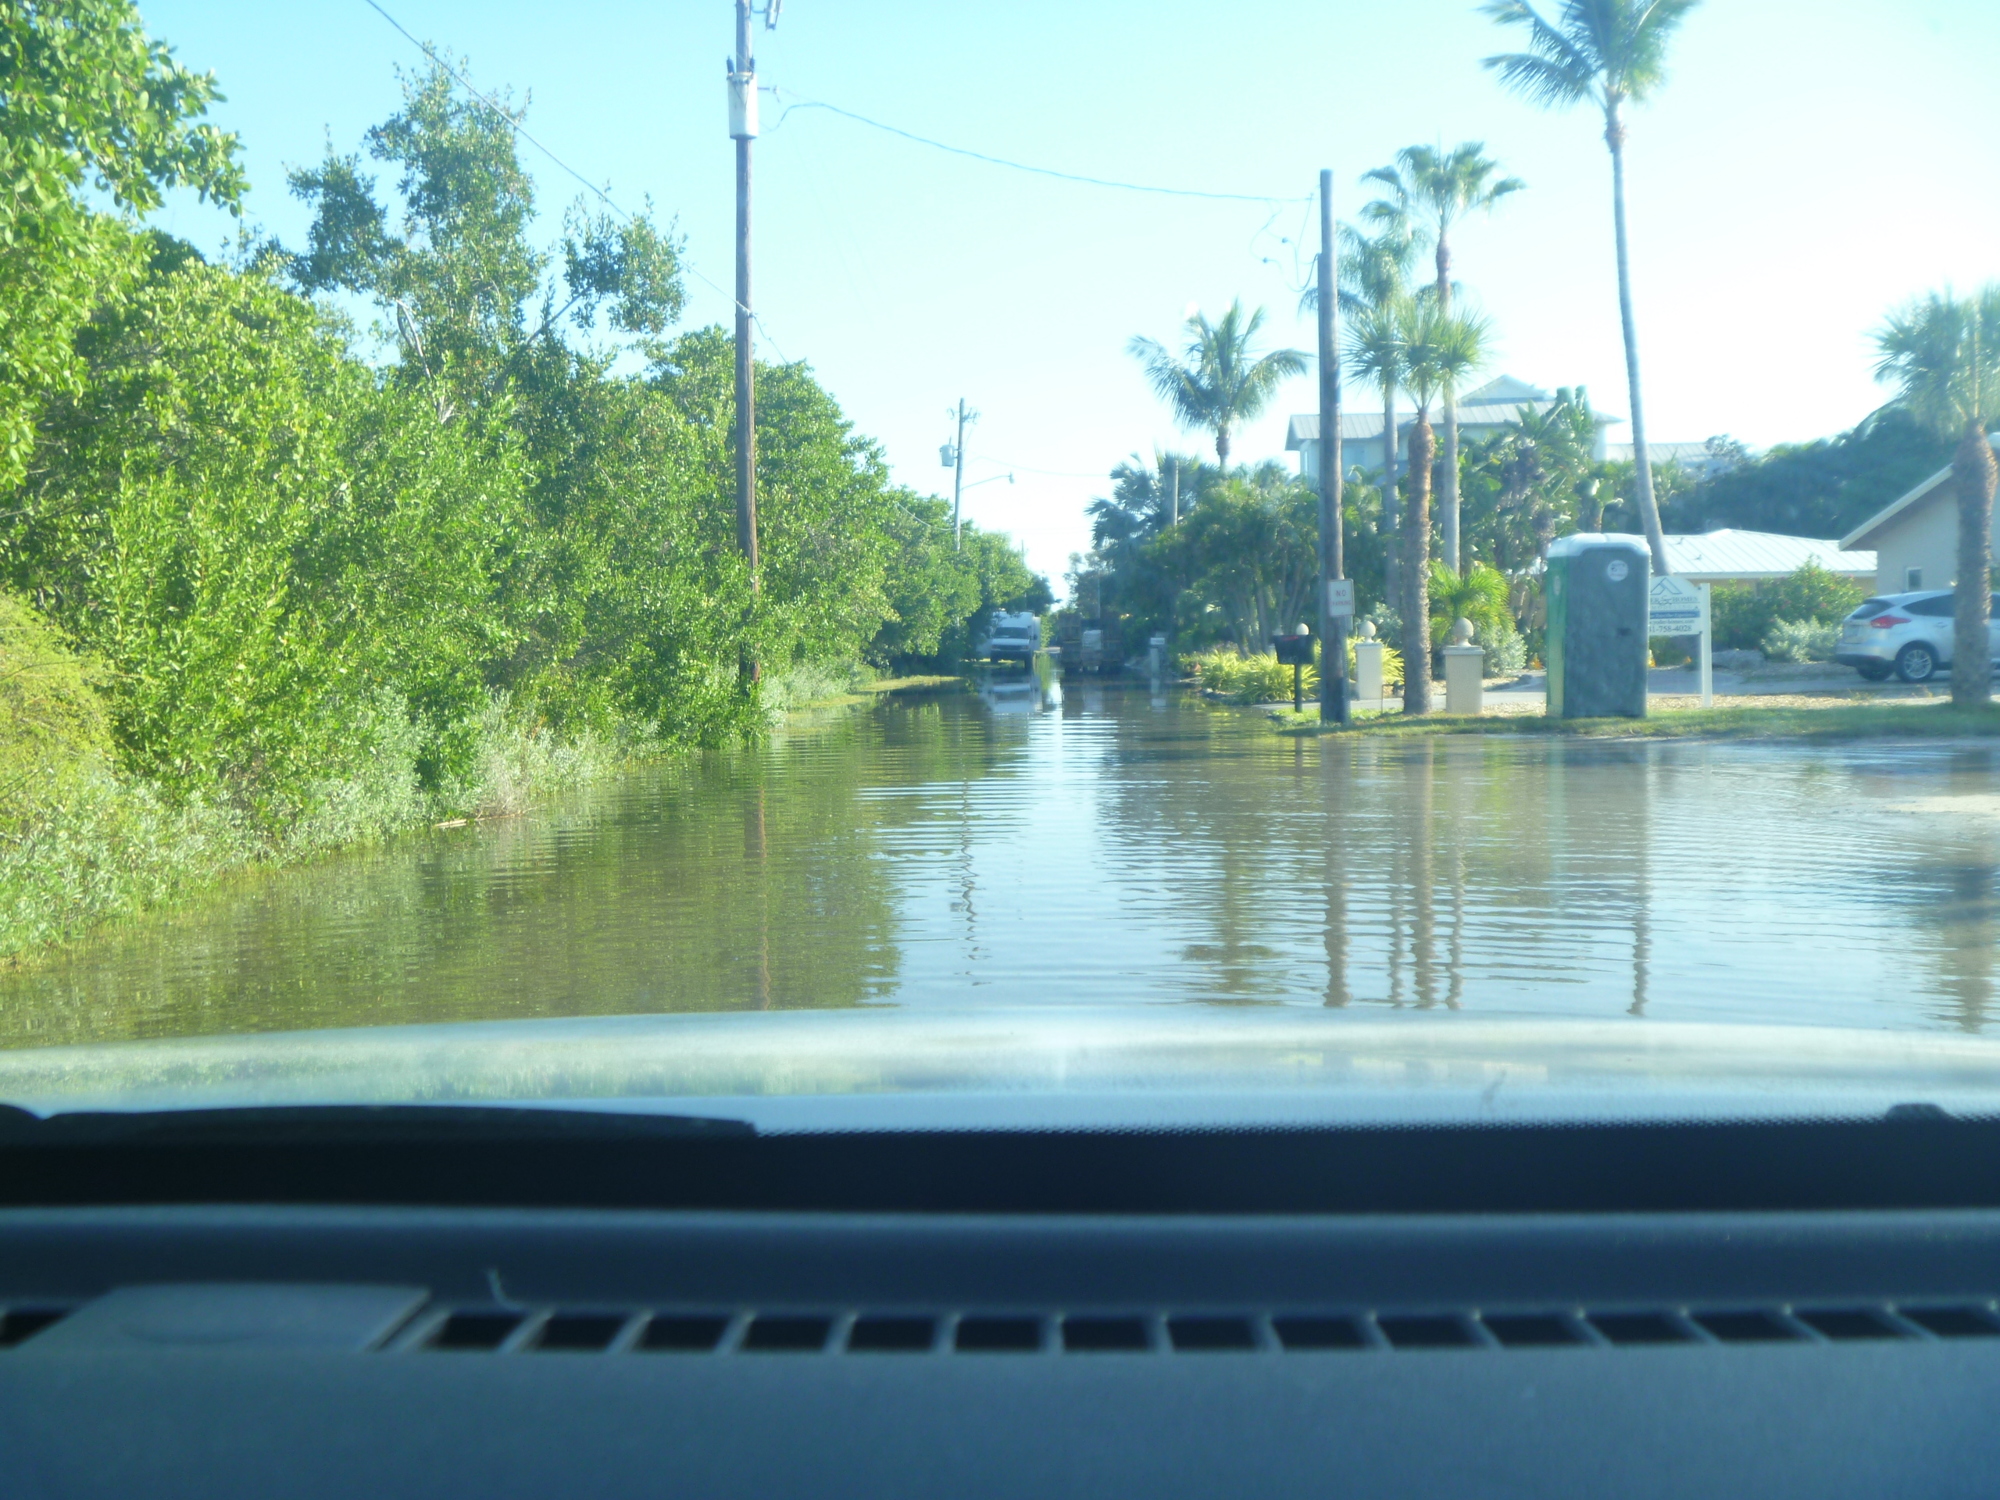 Lyons Lane is an area of Longboat Key that is prone to flooding whenever there is rain, a tropical storm or hurricane. This photo provided by the town of Longboat Key was taken in September 2019.